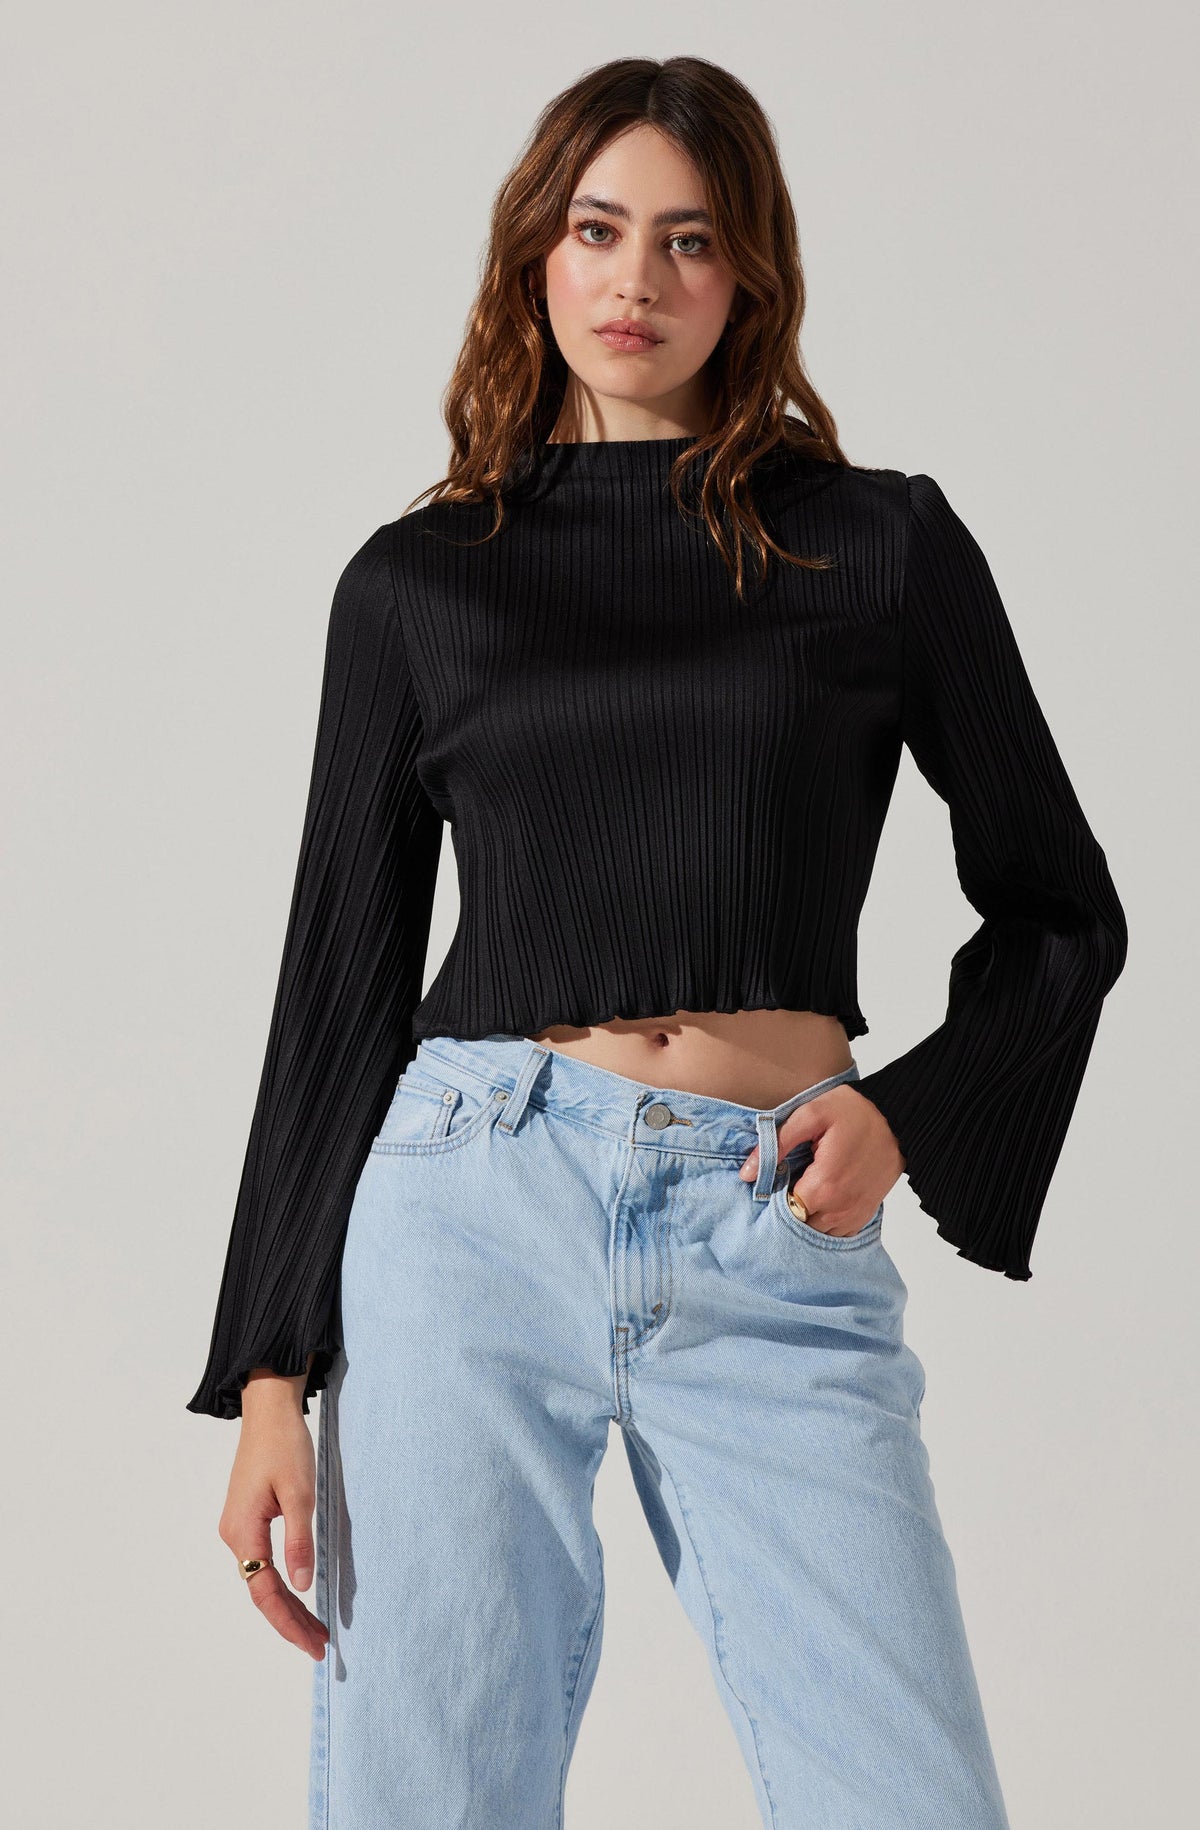 Bring on the Night Mock Neck Cropped Black Lace Top - ShopperBoard